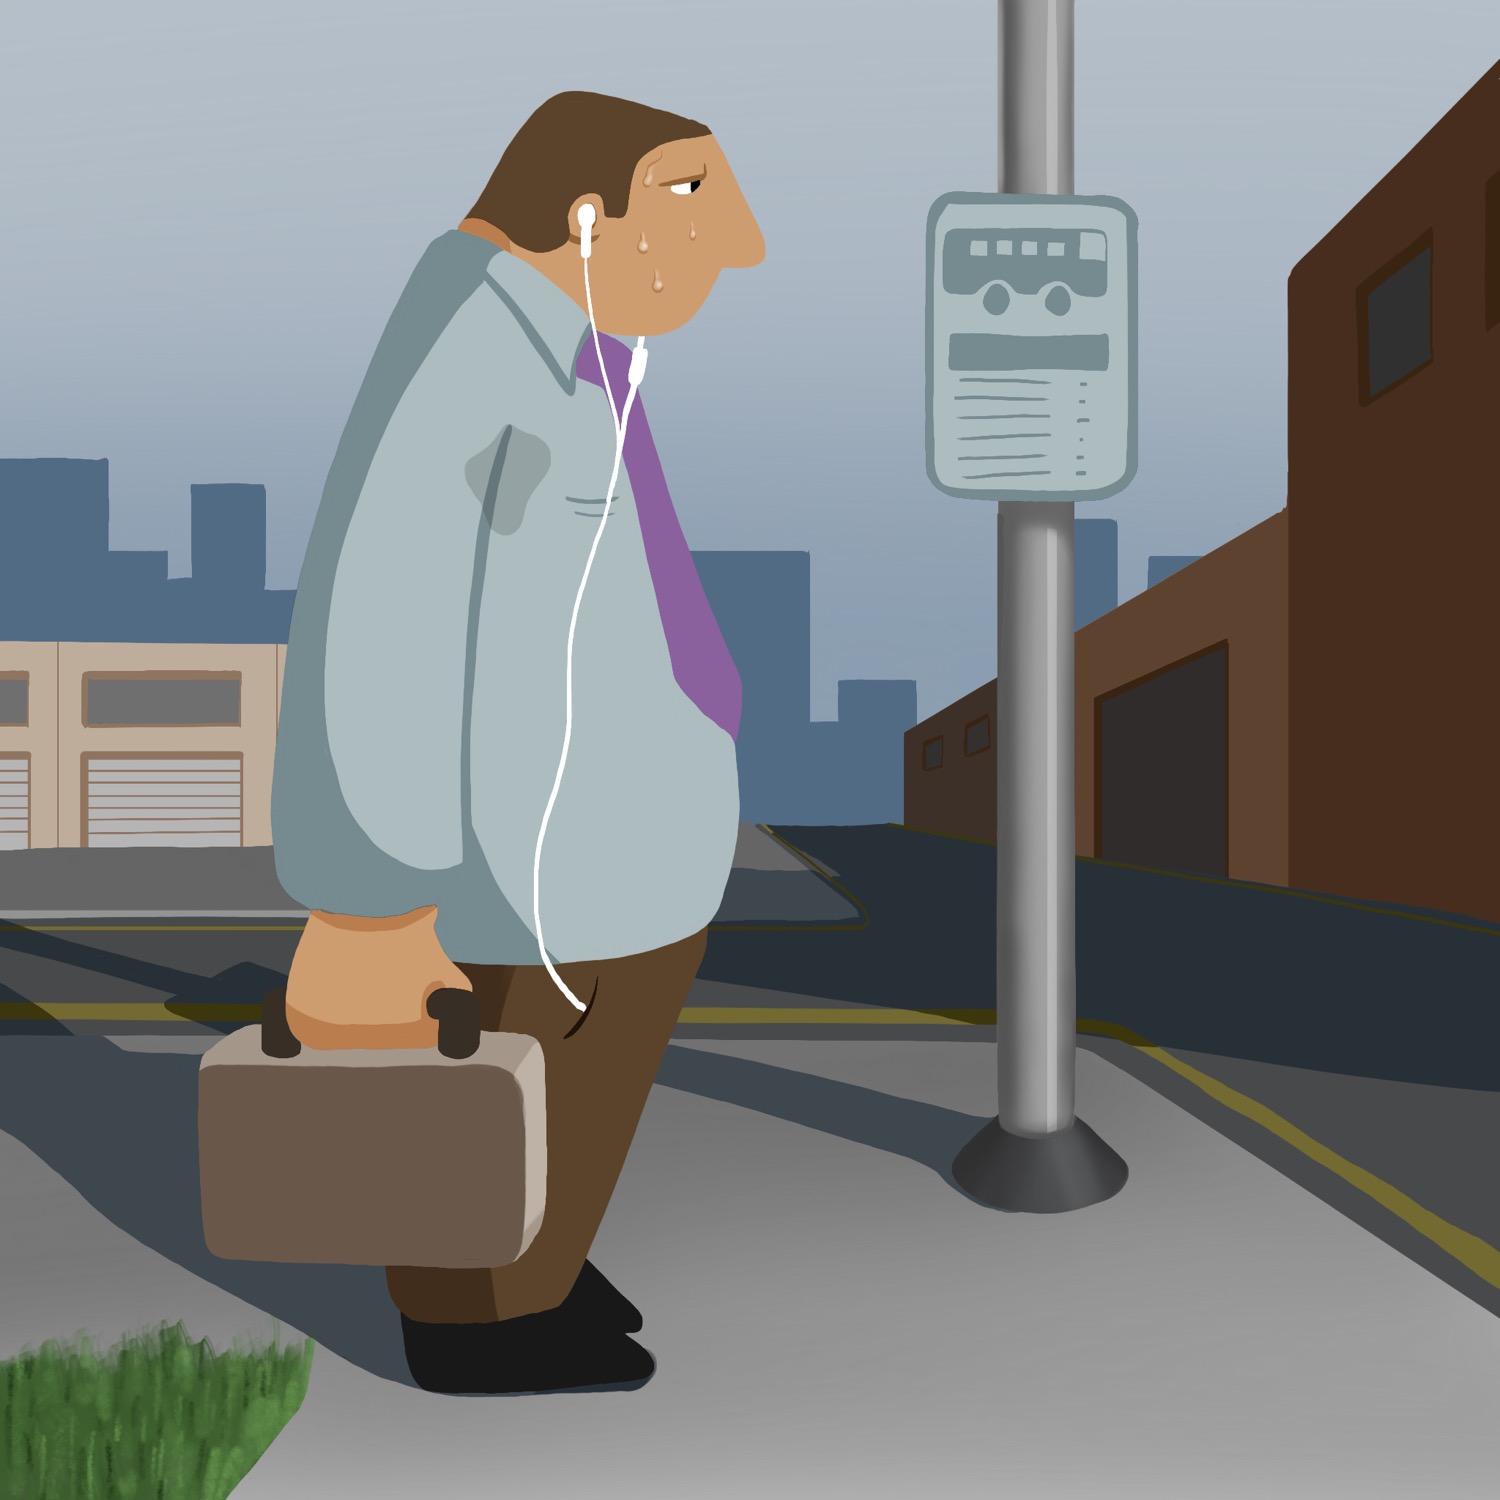 An illustration of a man waiting at the bus stop in the hot hot heat.